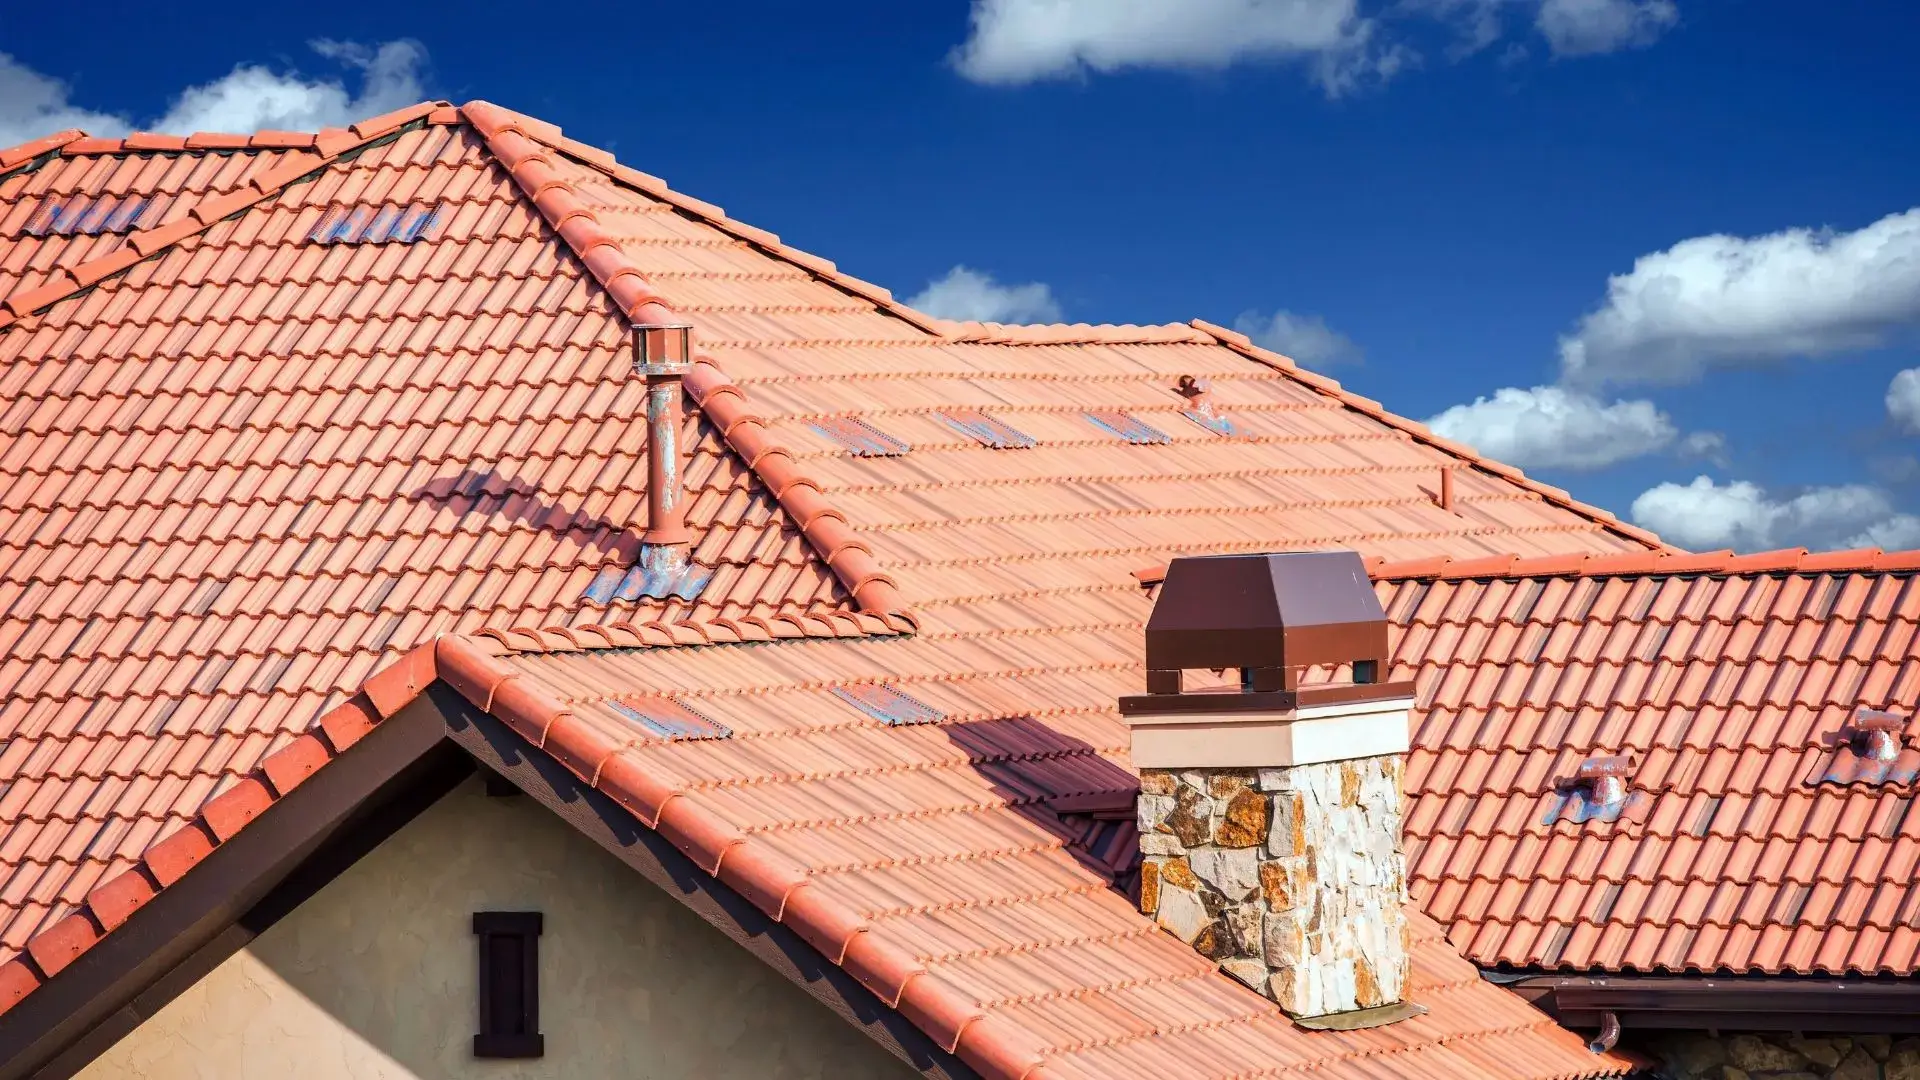 Need a New Roof but Can't Afford It? Finding Budget-Friendly Solutions